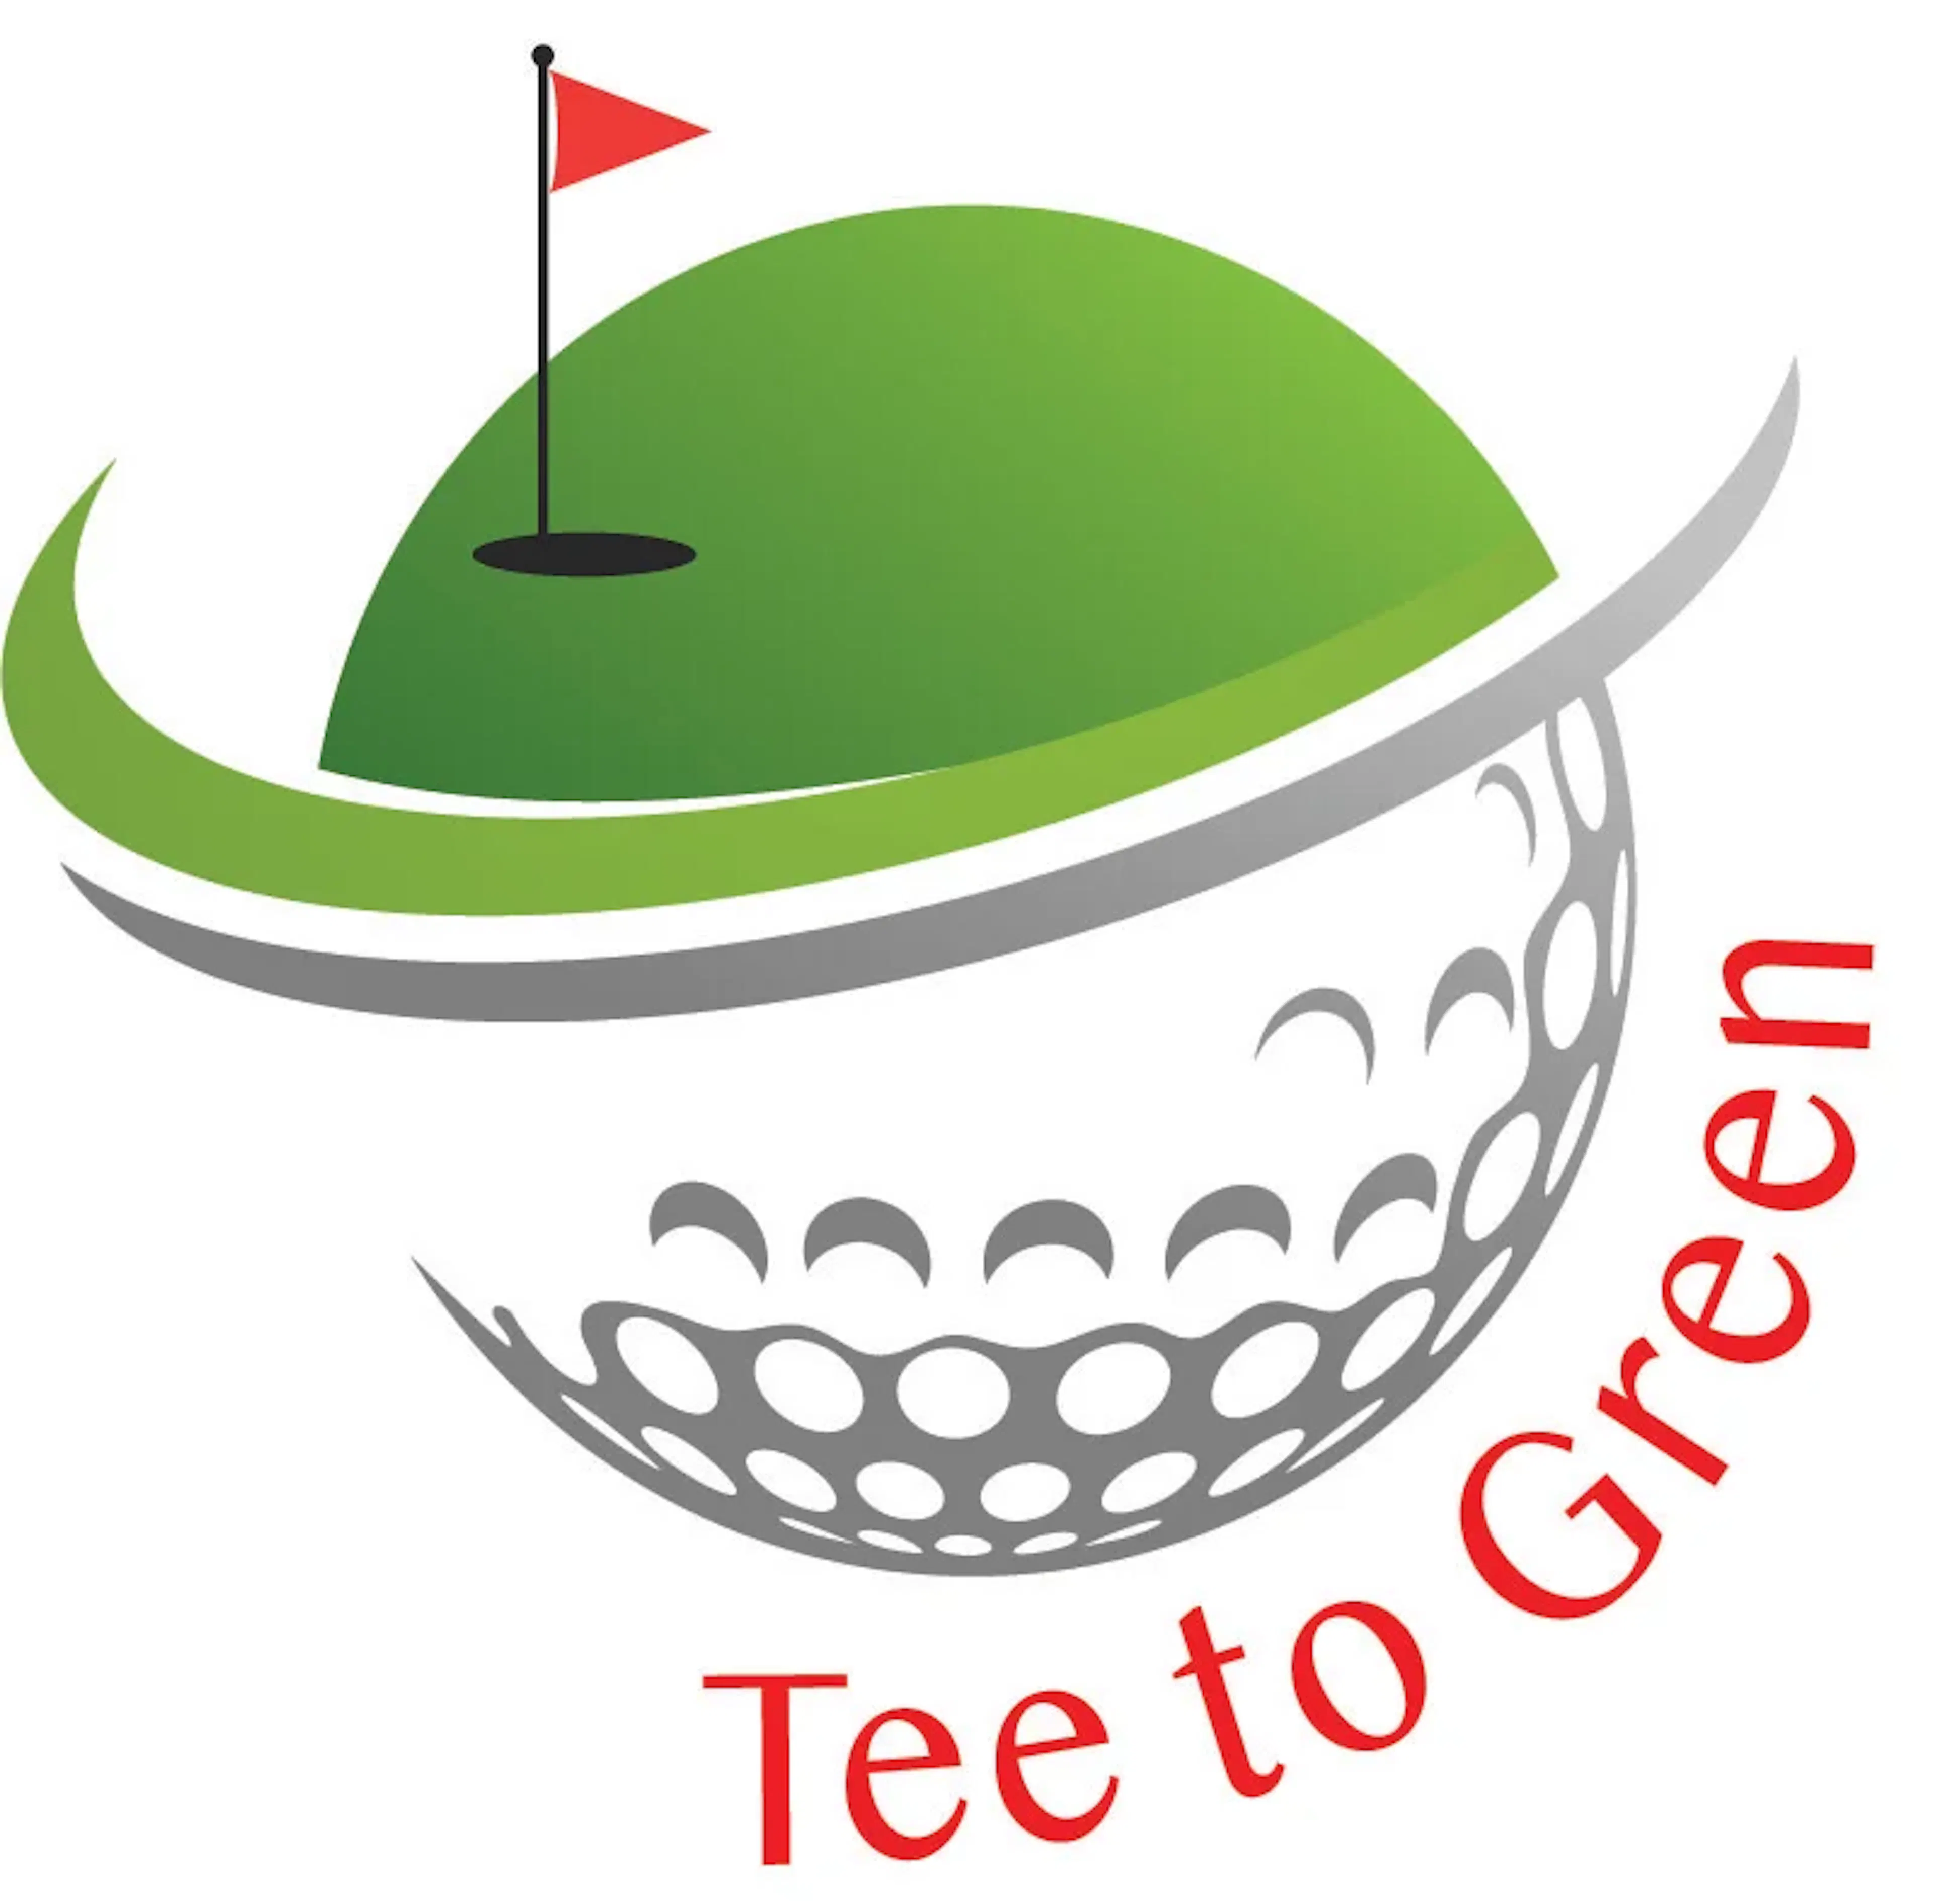 tee to green